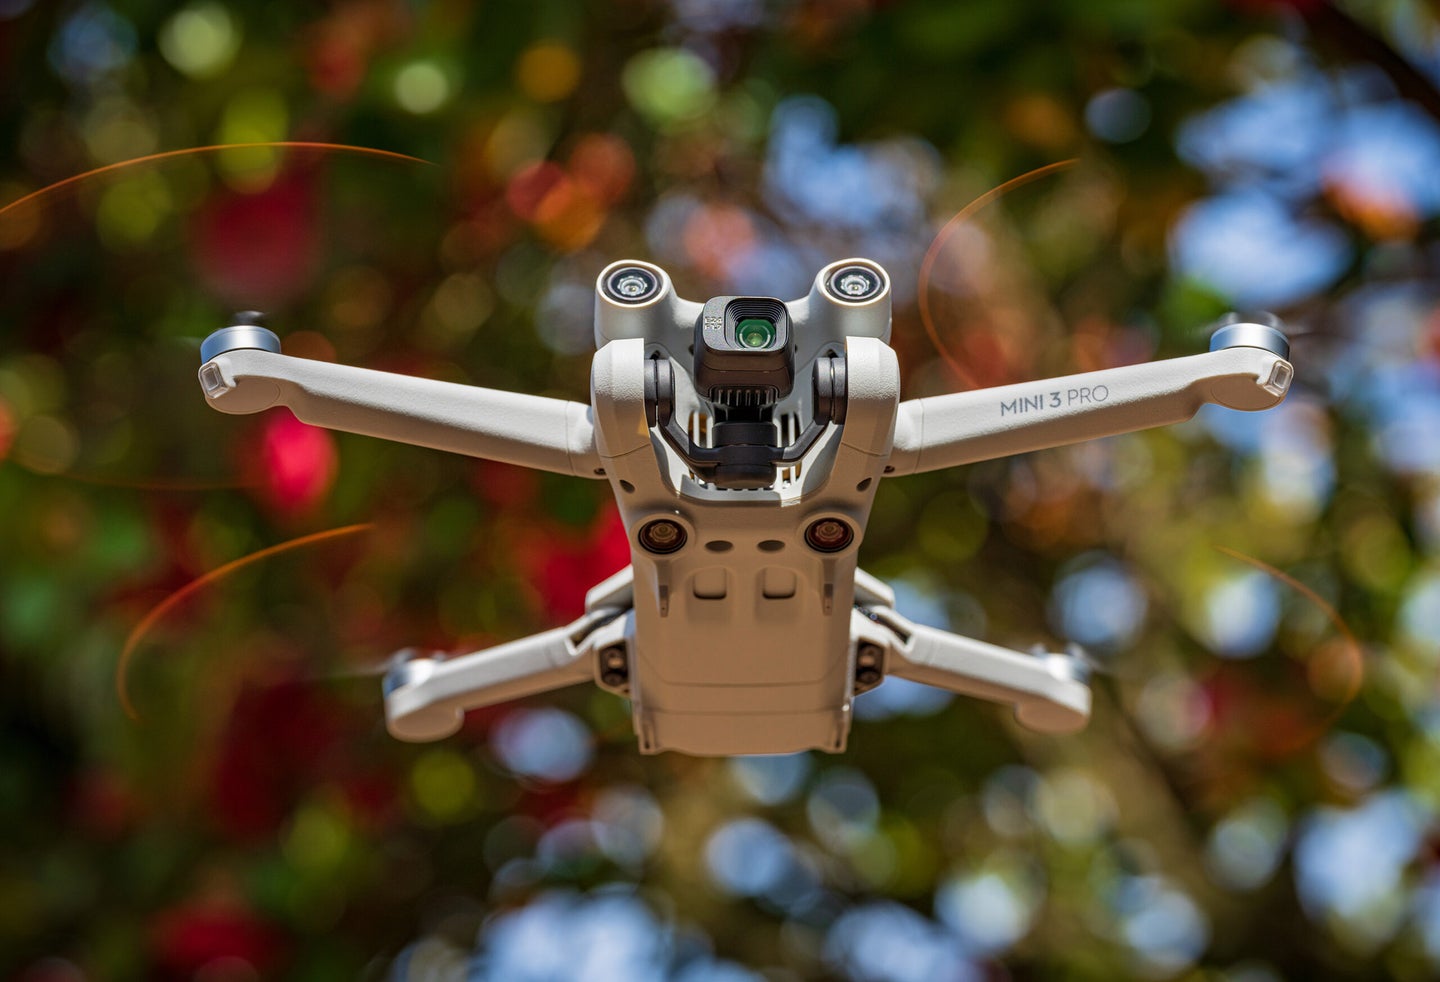 Always on the lookout for obstacles, the Mini 3 Pro has three sets of binocular optical sensors that scan forward, behind and beneath the drone.